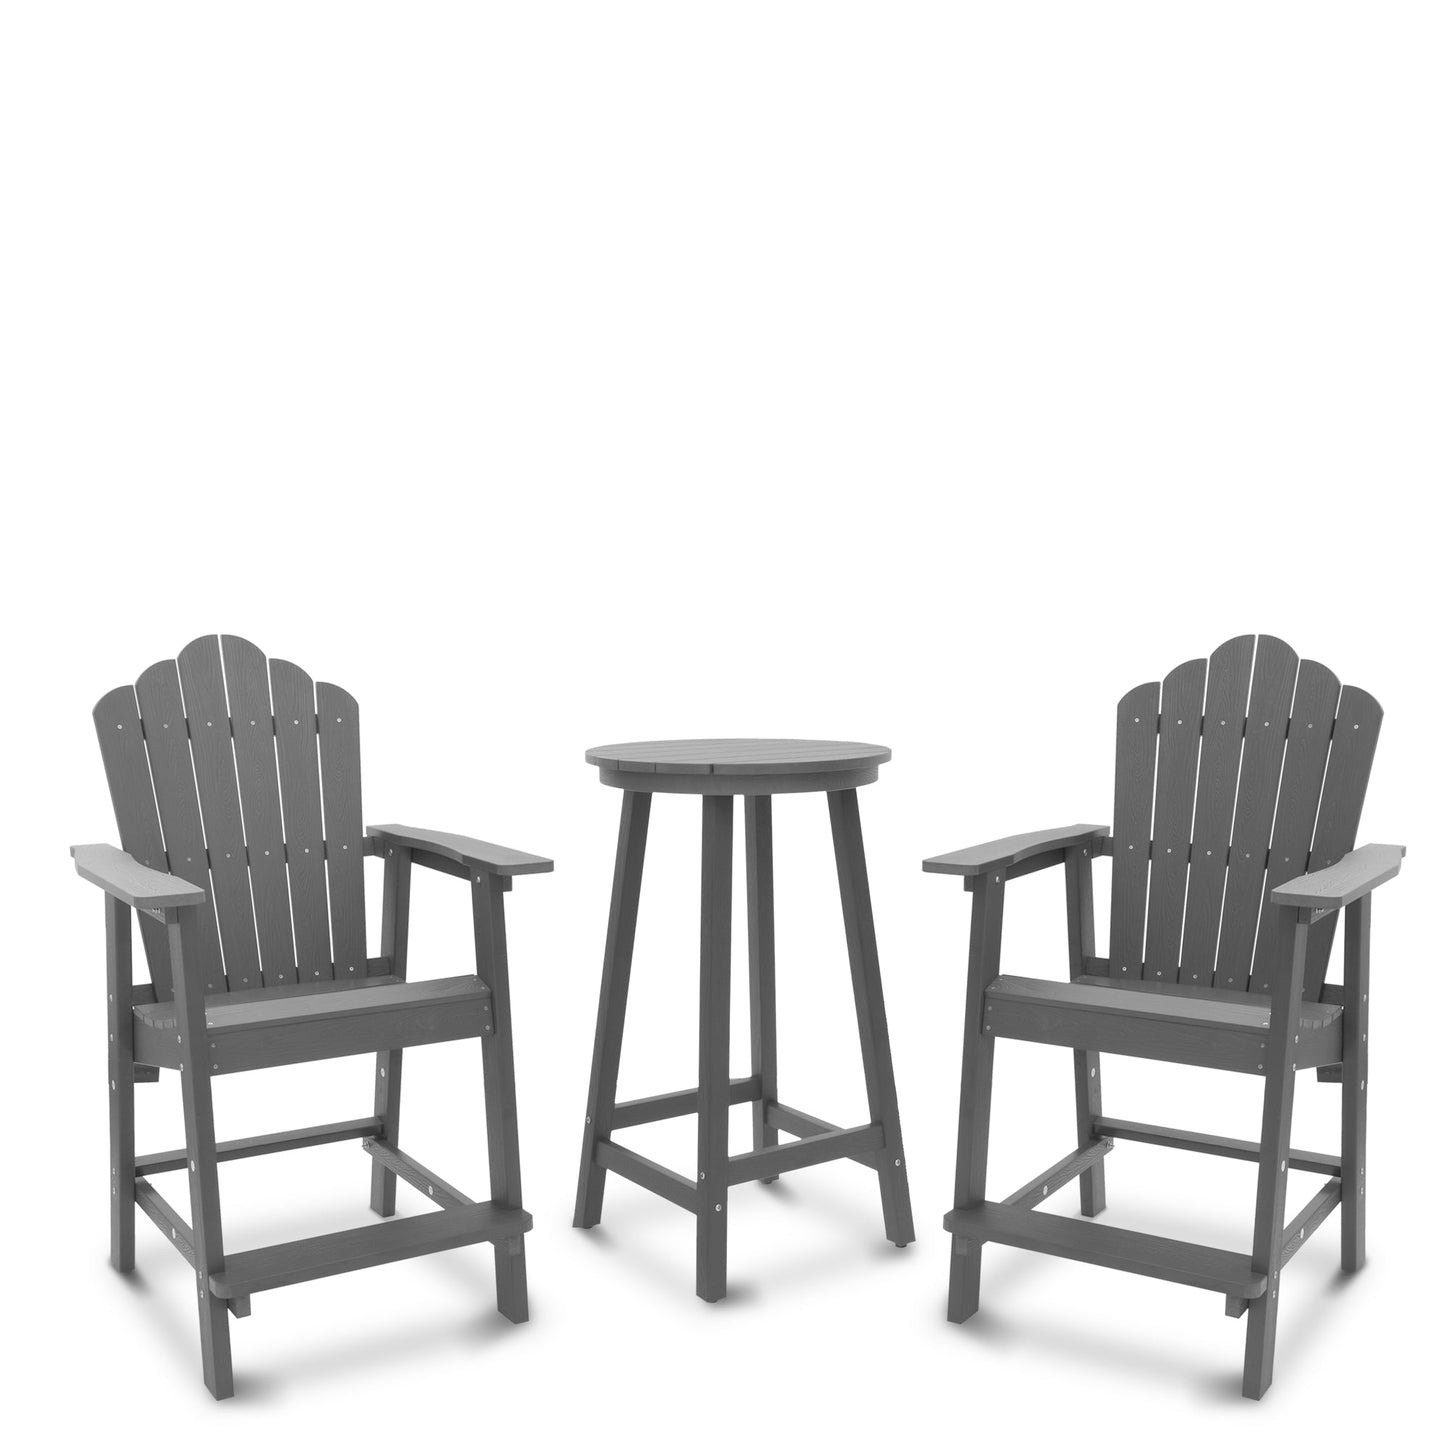 MONDAWE 3 Pieces Outdoor Patio Adirondack Chair and Table Outdoor Bar Set